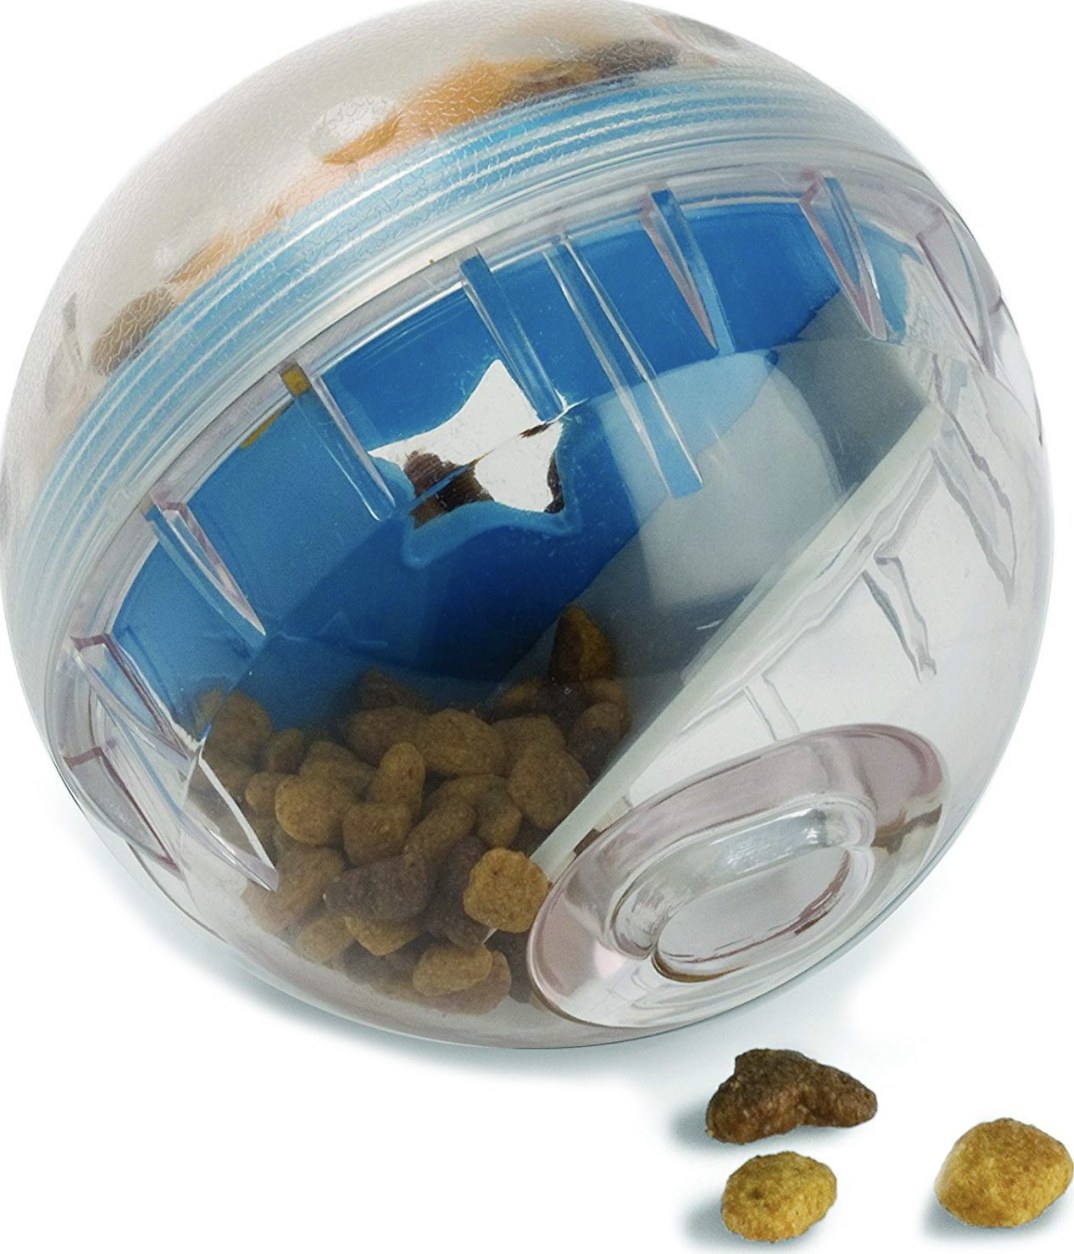 The blue and clear colored ball has a star and oval slot and various pieces of kibble